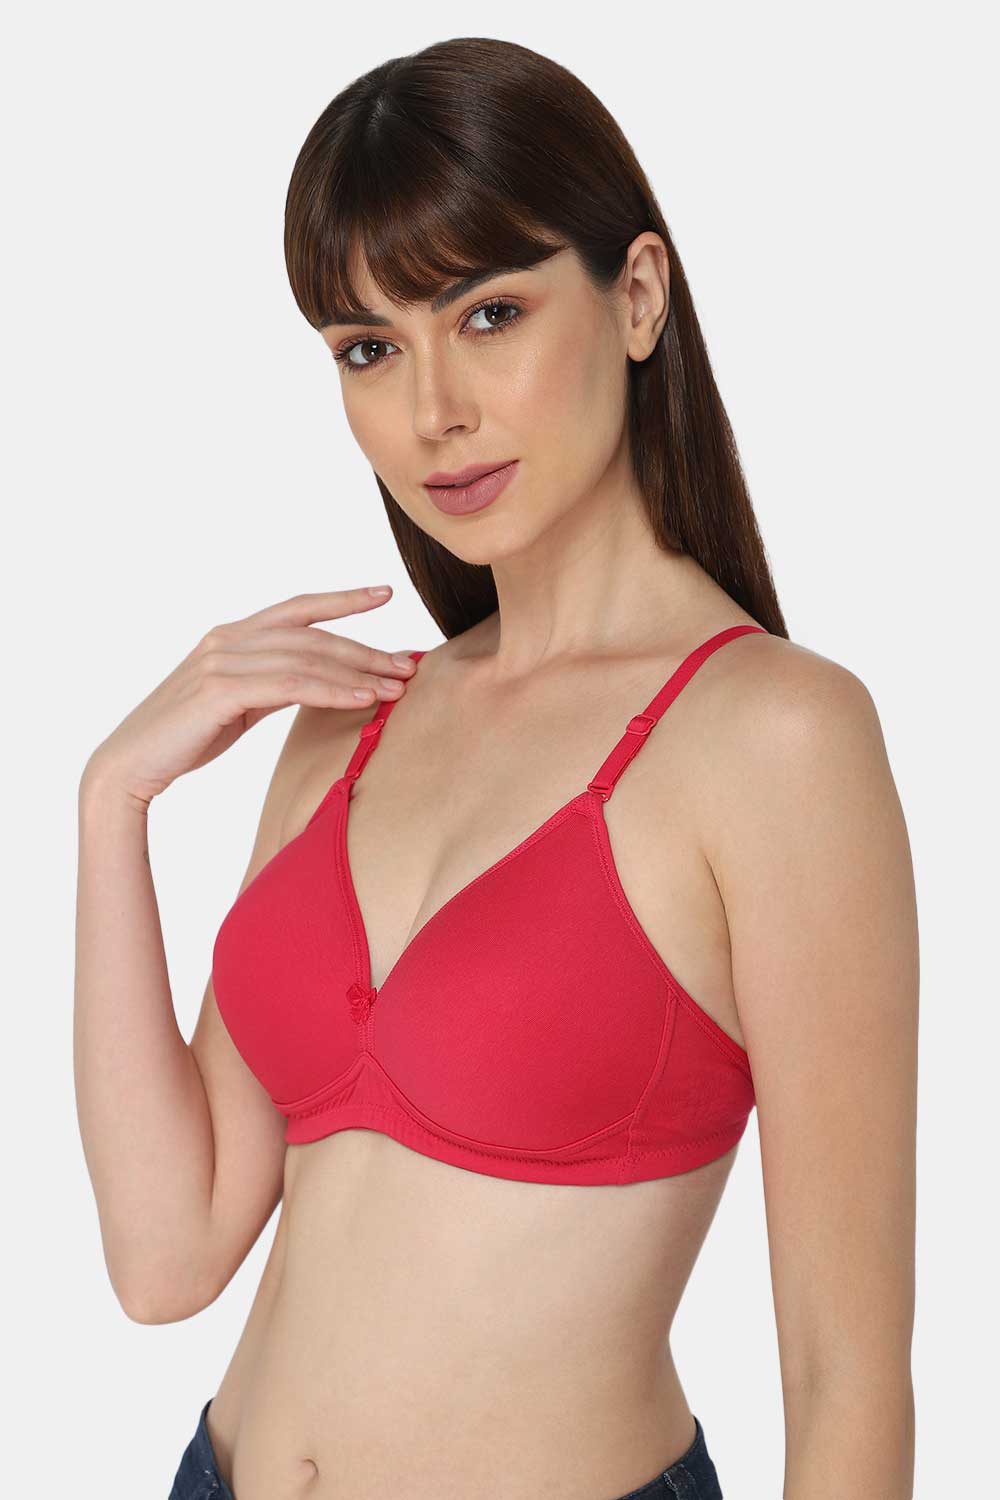 32 B Non-Wired Bras - Buy 32b Size Wire-Free Bra Online in India